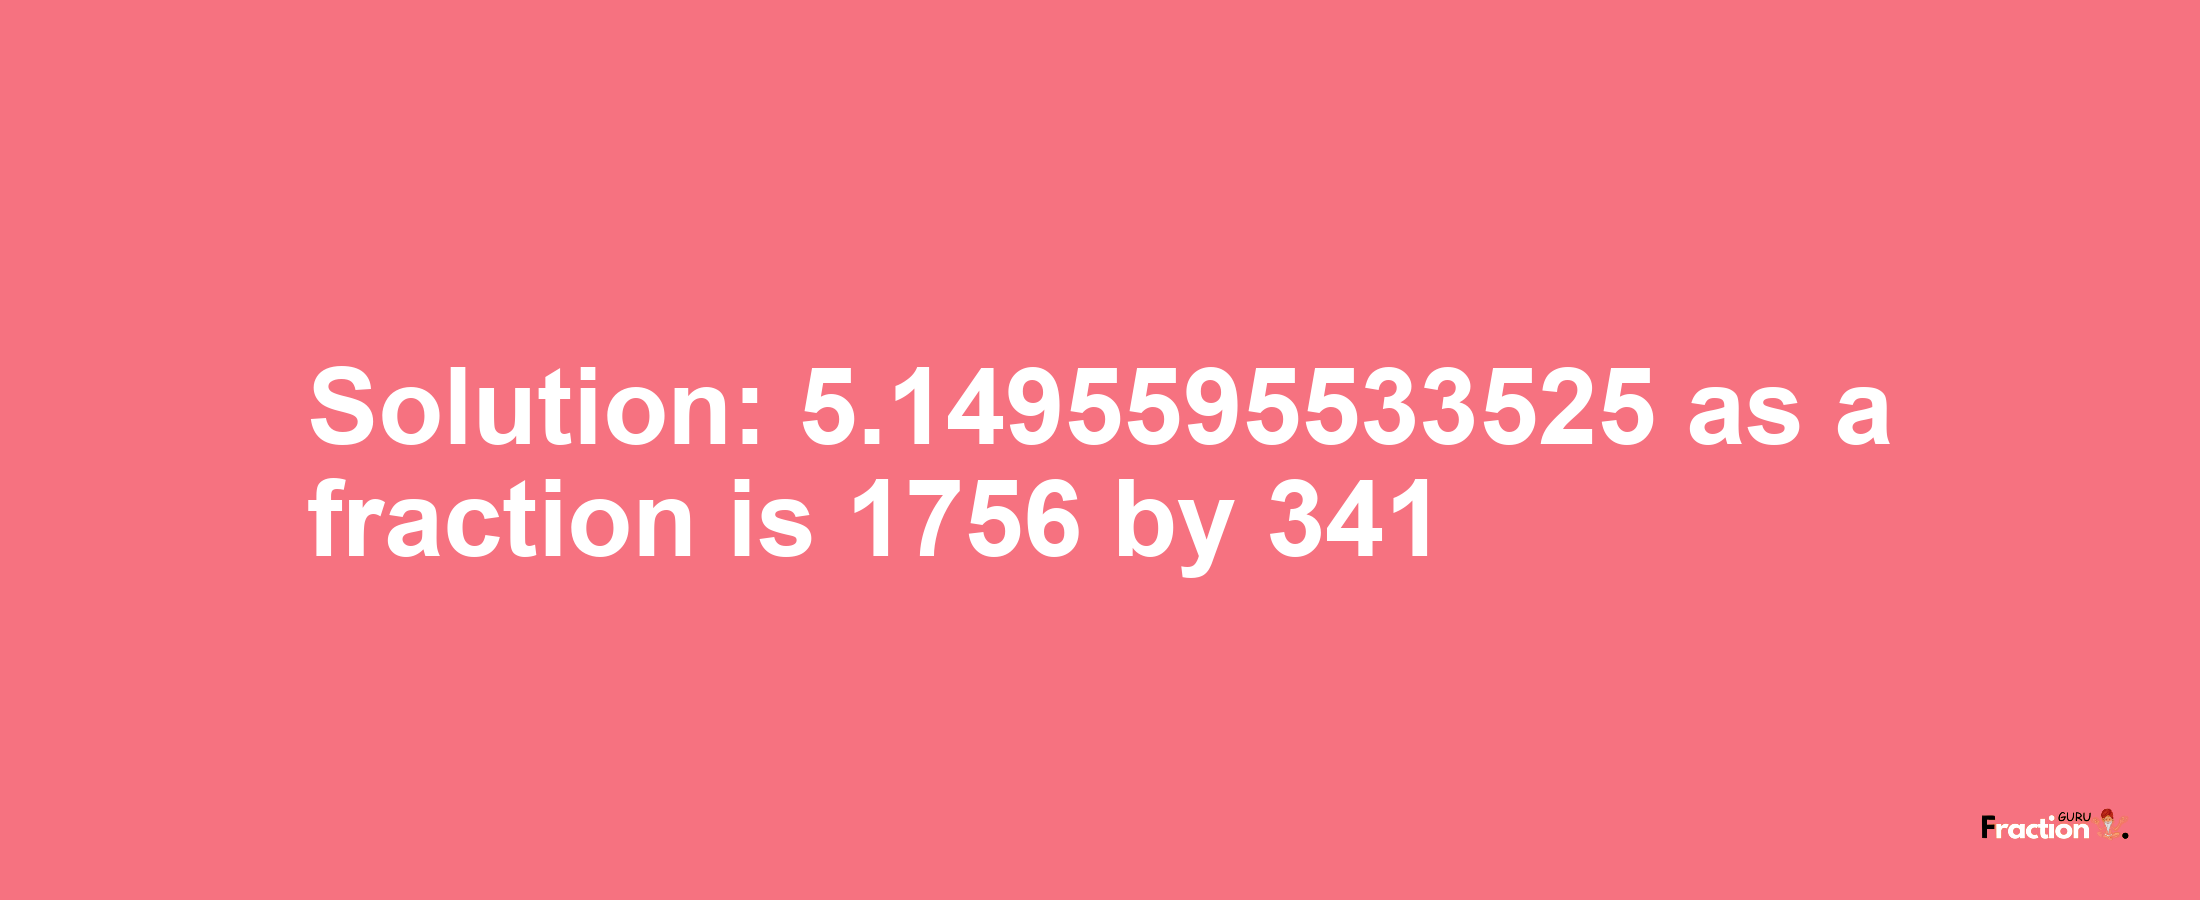 Solution:5.1495595533525 as a fraction is 1756/341